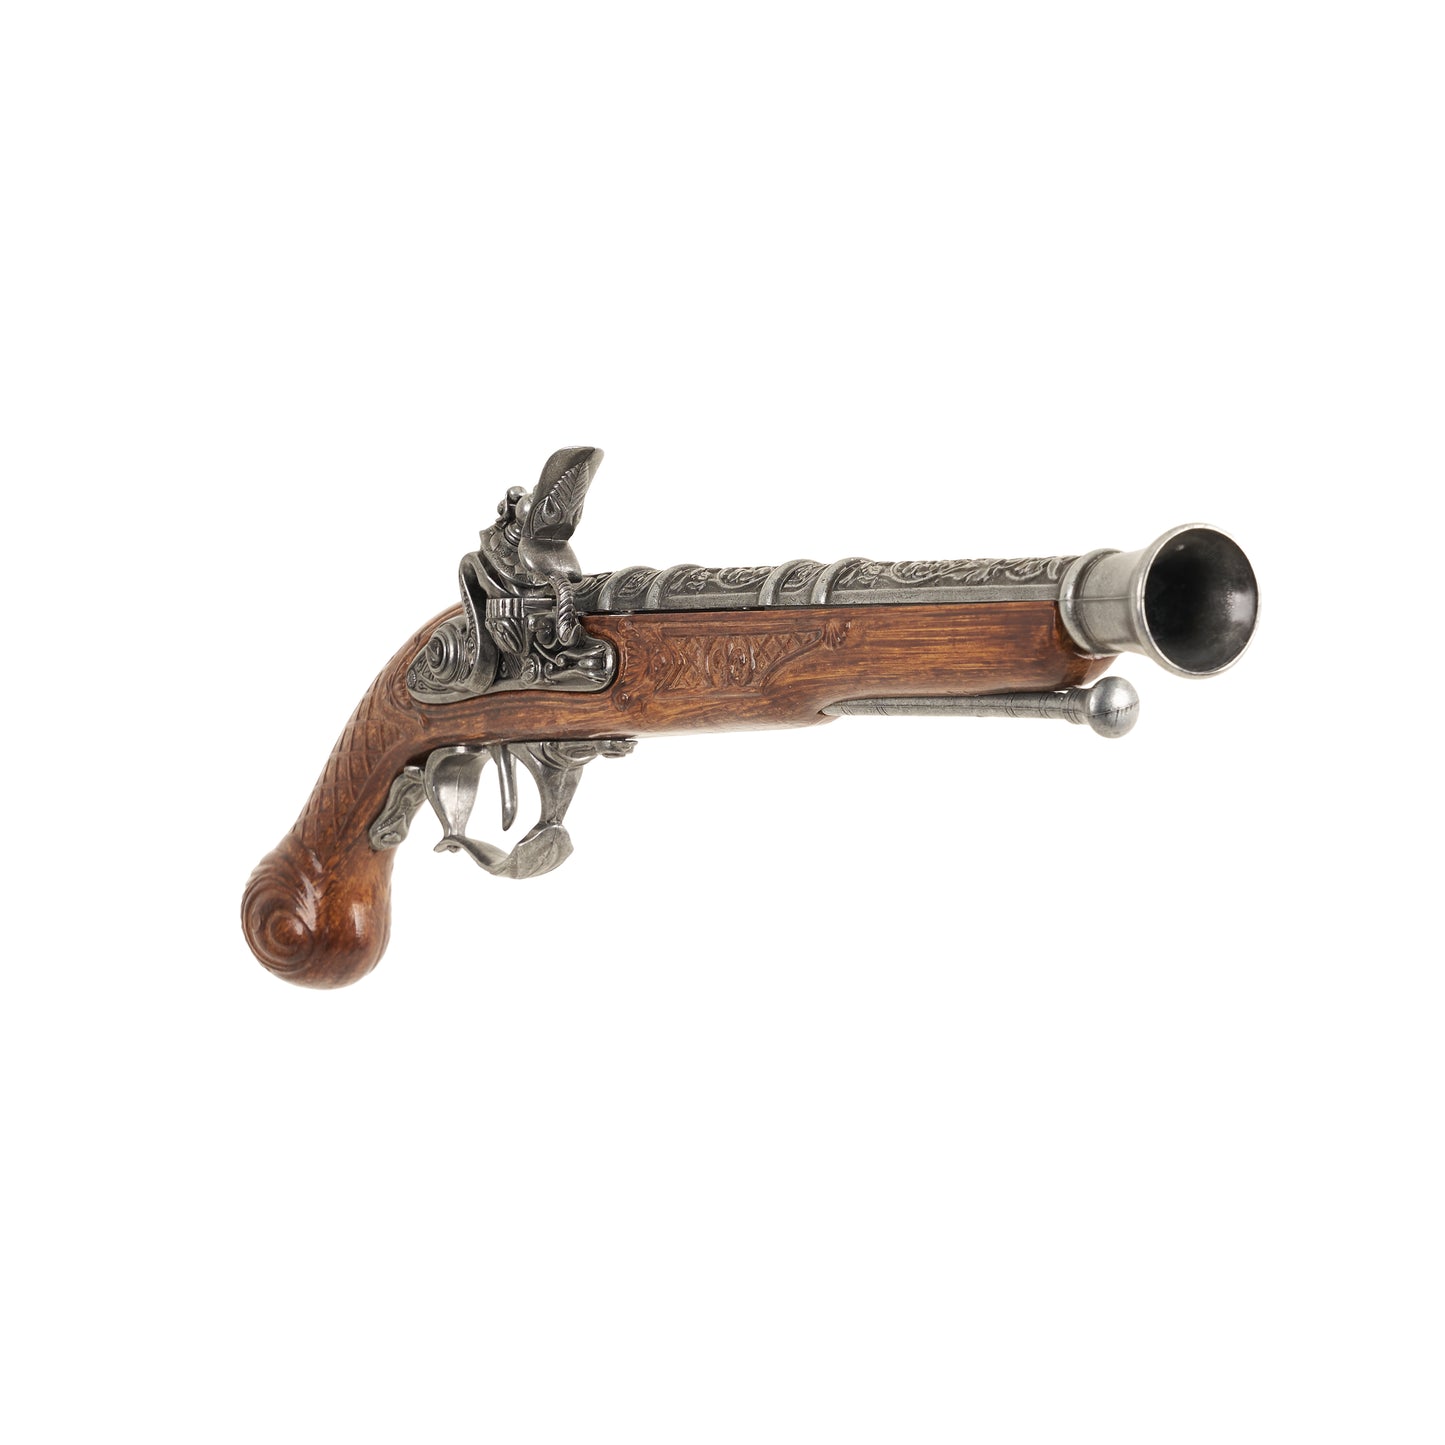 Front view of the Replica 18th Century Arquebus Flintlock Pistol with intricately carved metal mechanisms, barrel, and carved faux wood grip.